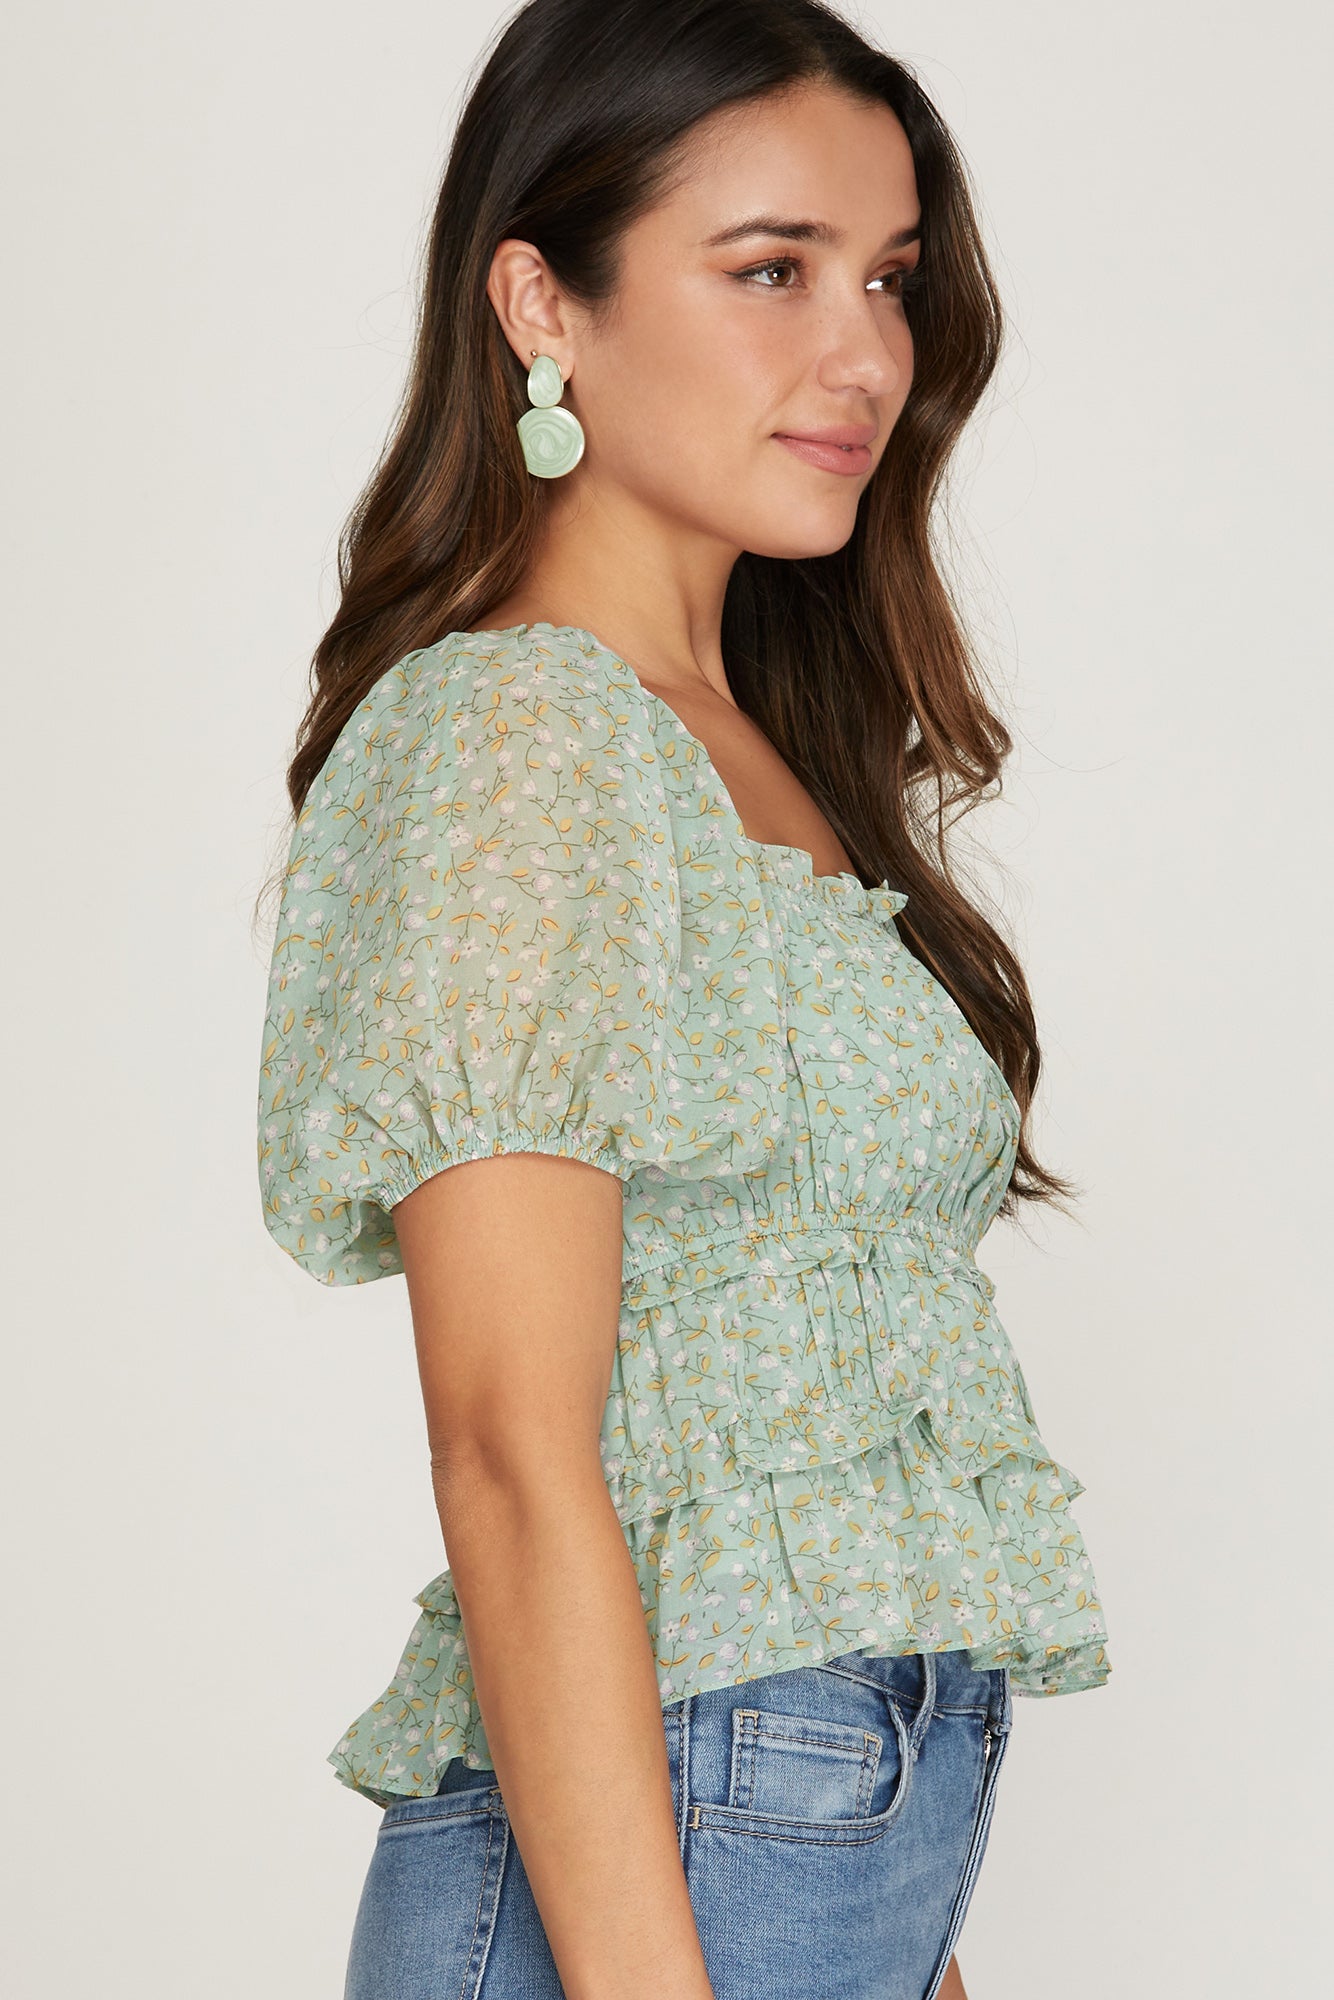 She&Sky Frolicking Fields Top - Sage, square neck, short puff sleeves, floral print, smocked, ruffle bottom